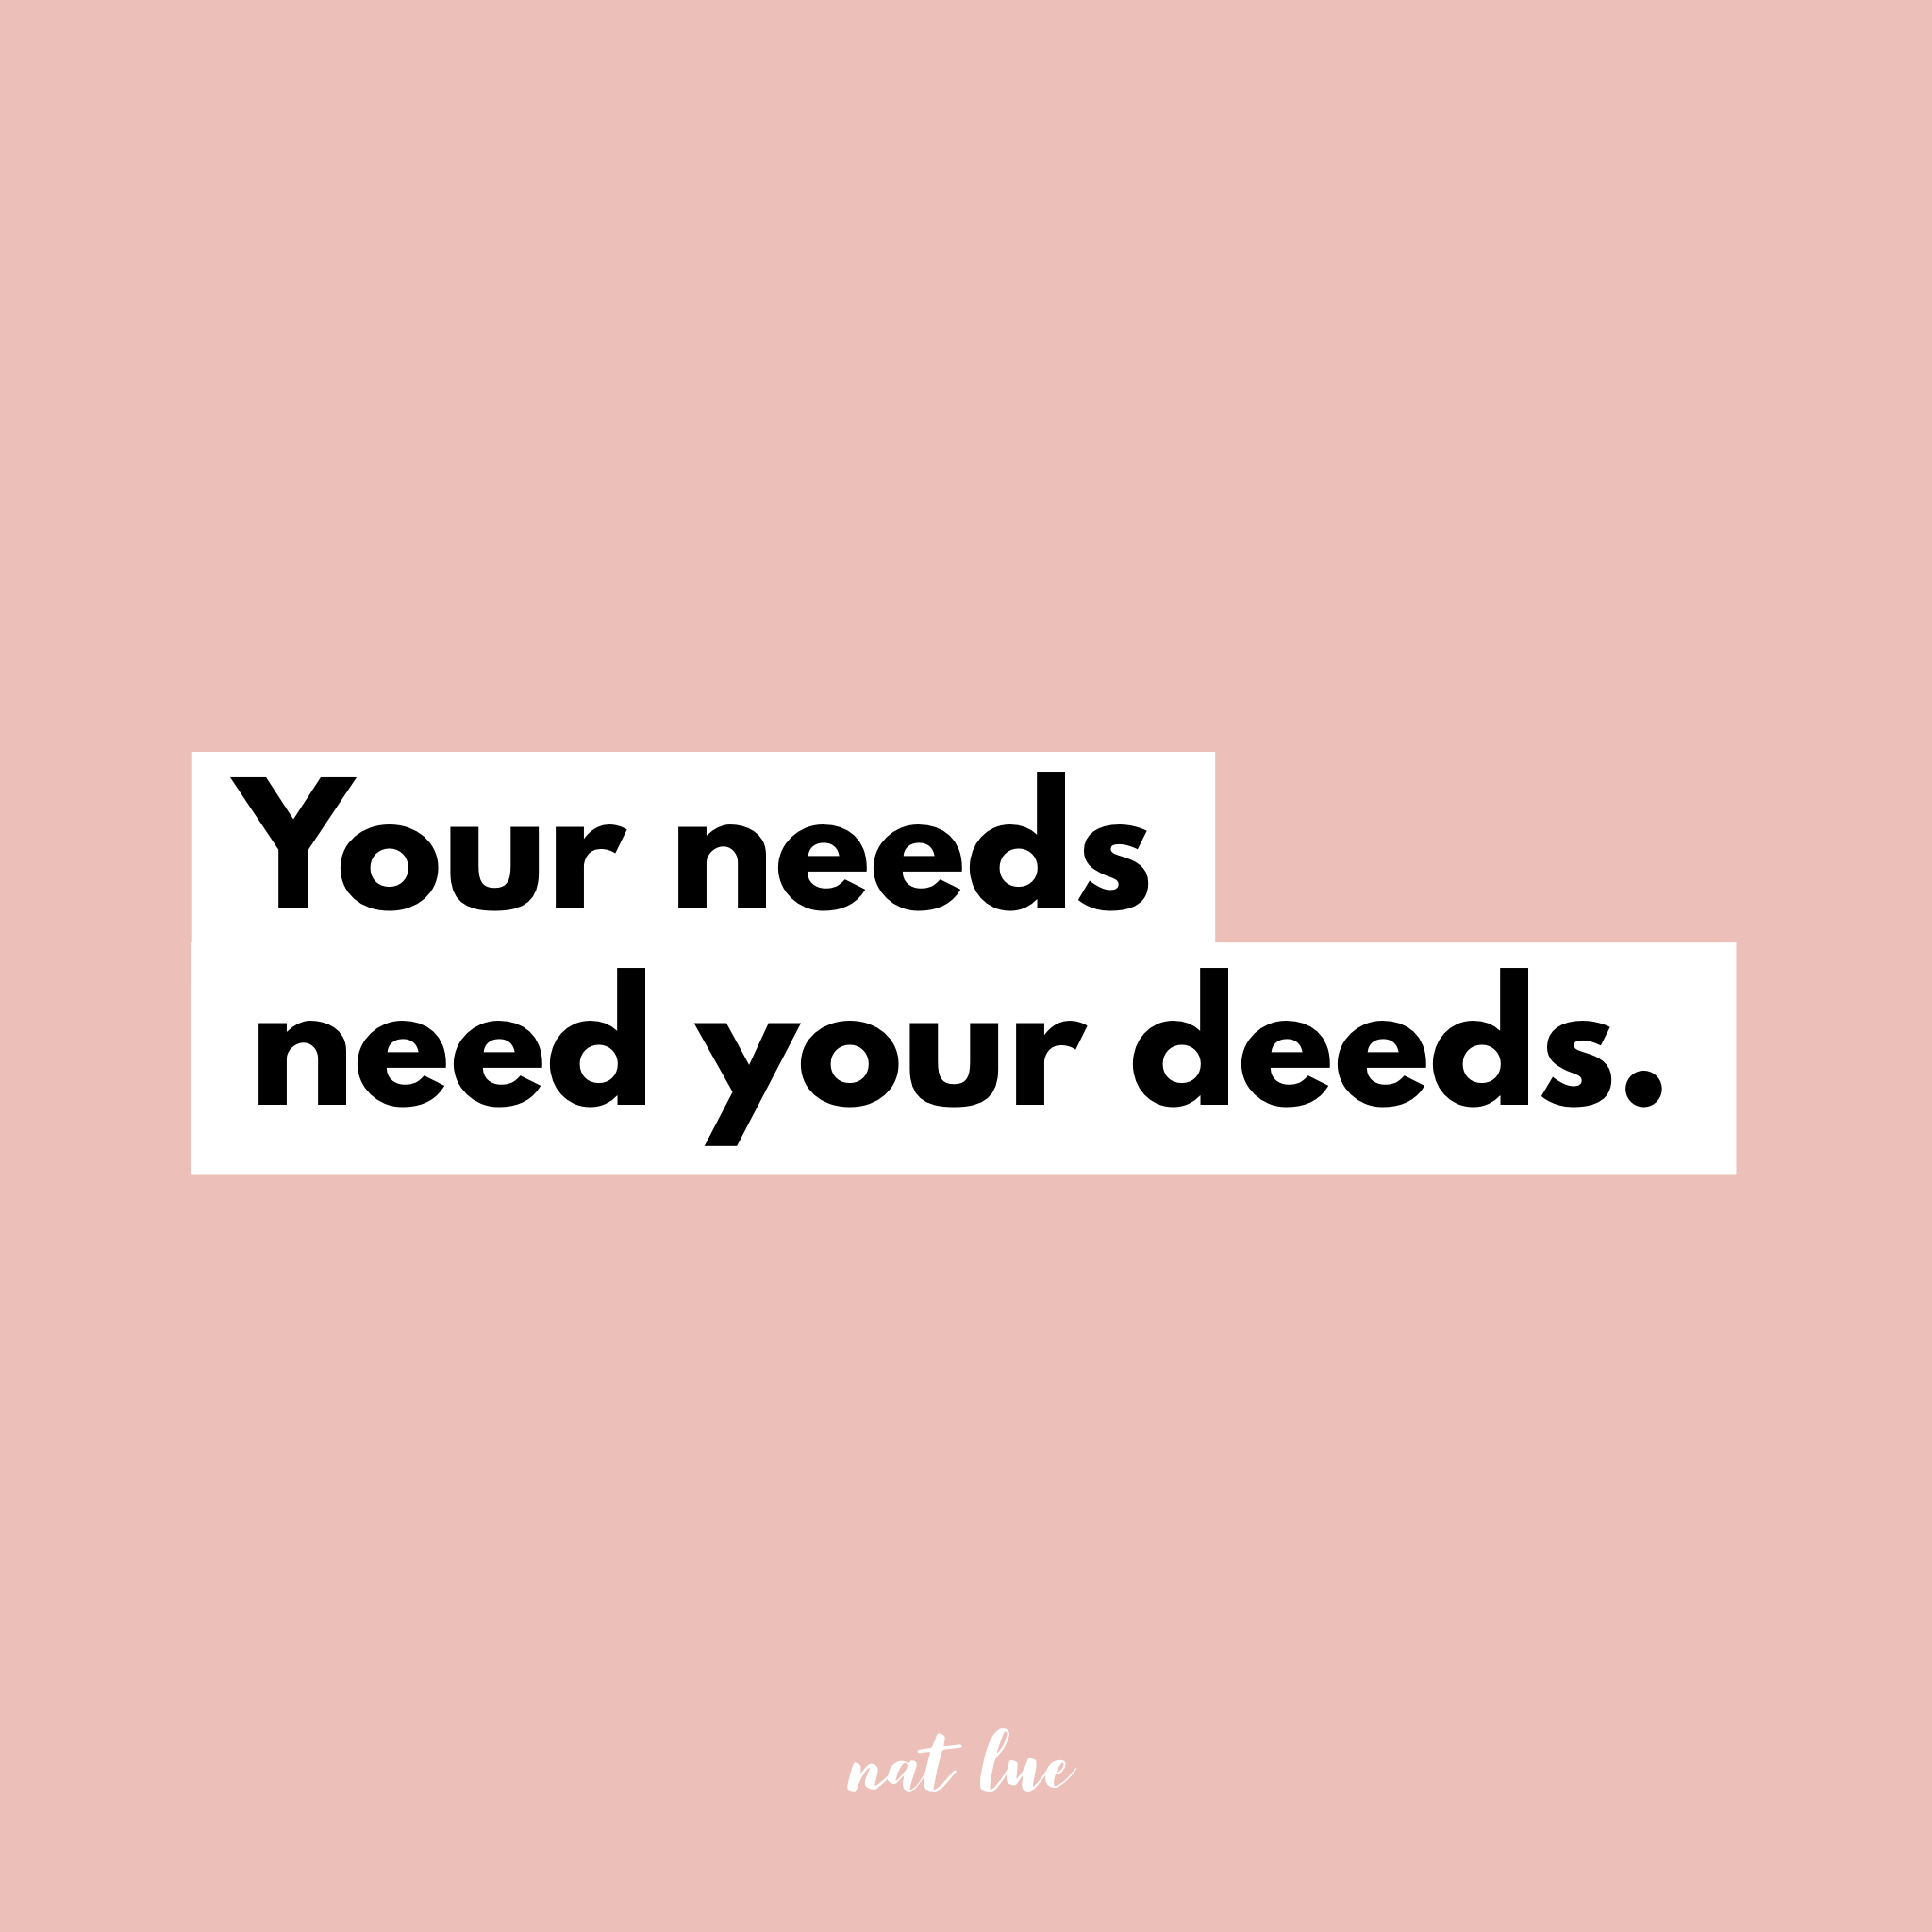 "Your needs need your deeds." by Natalie Lue